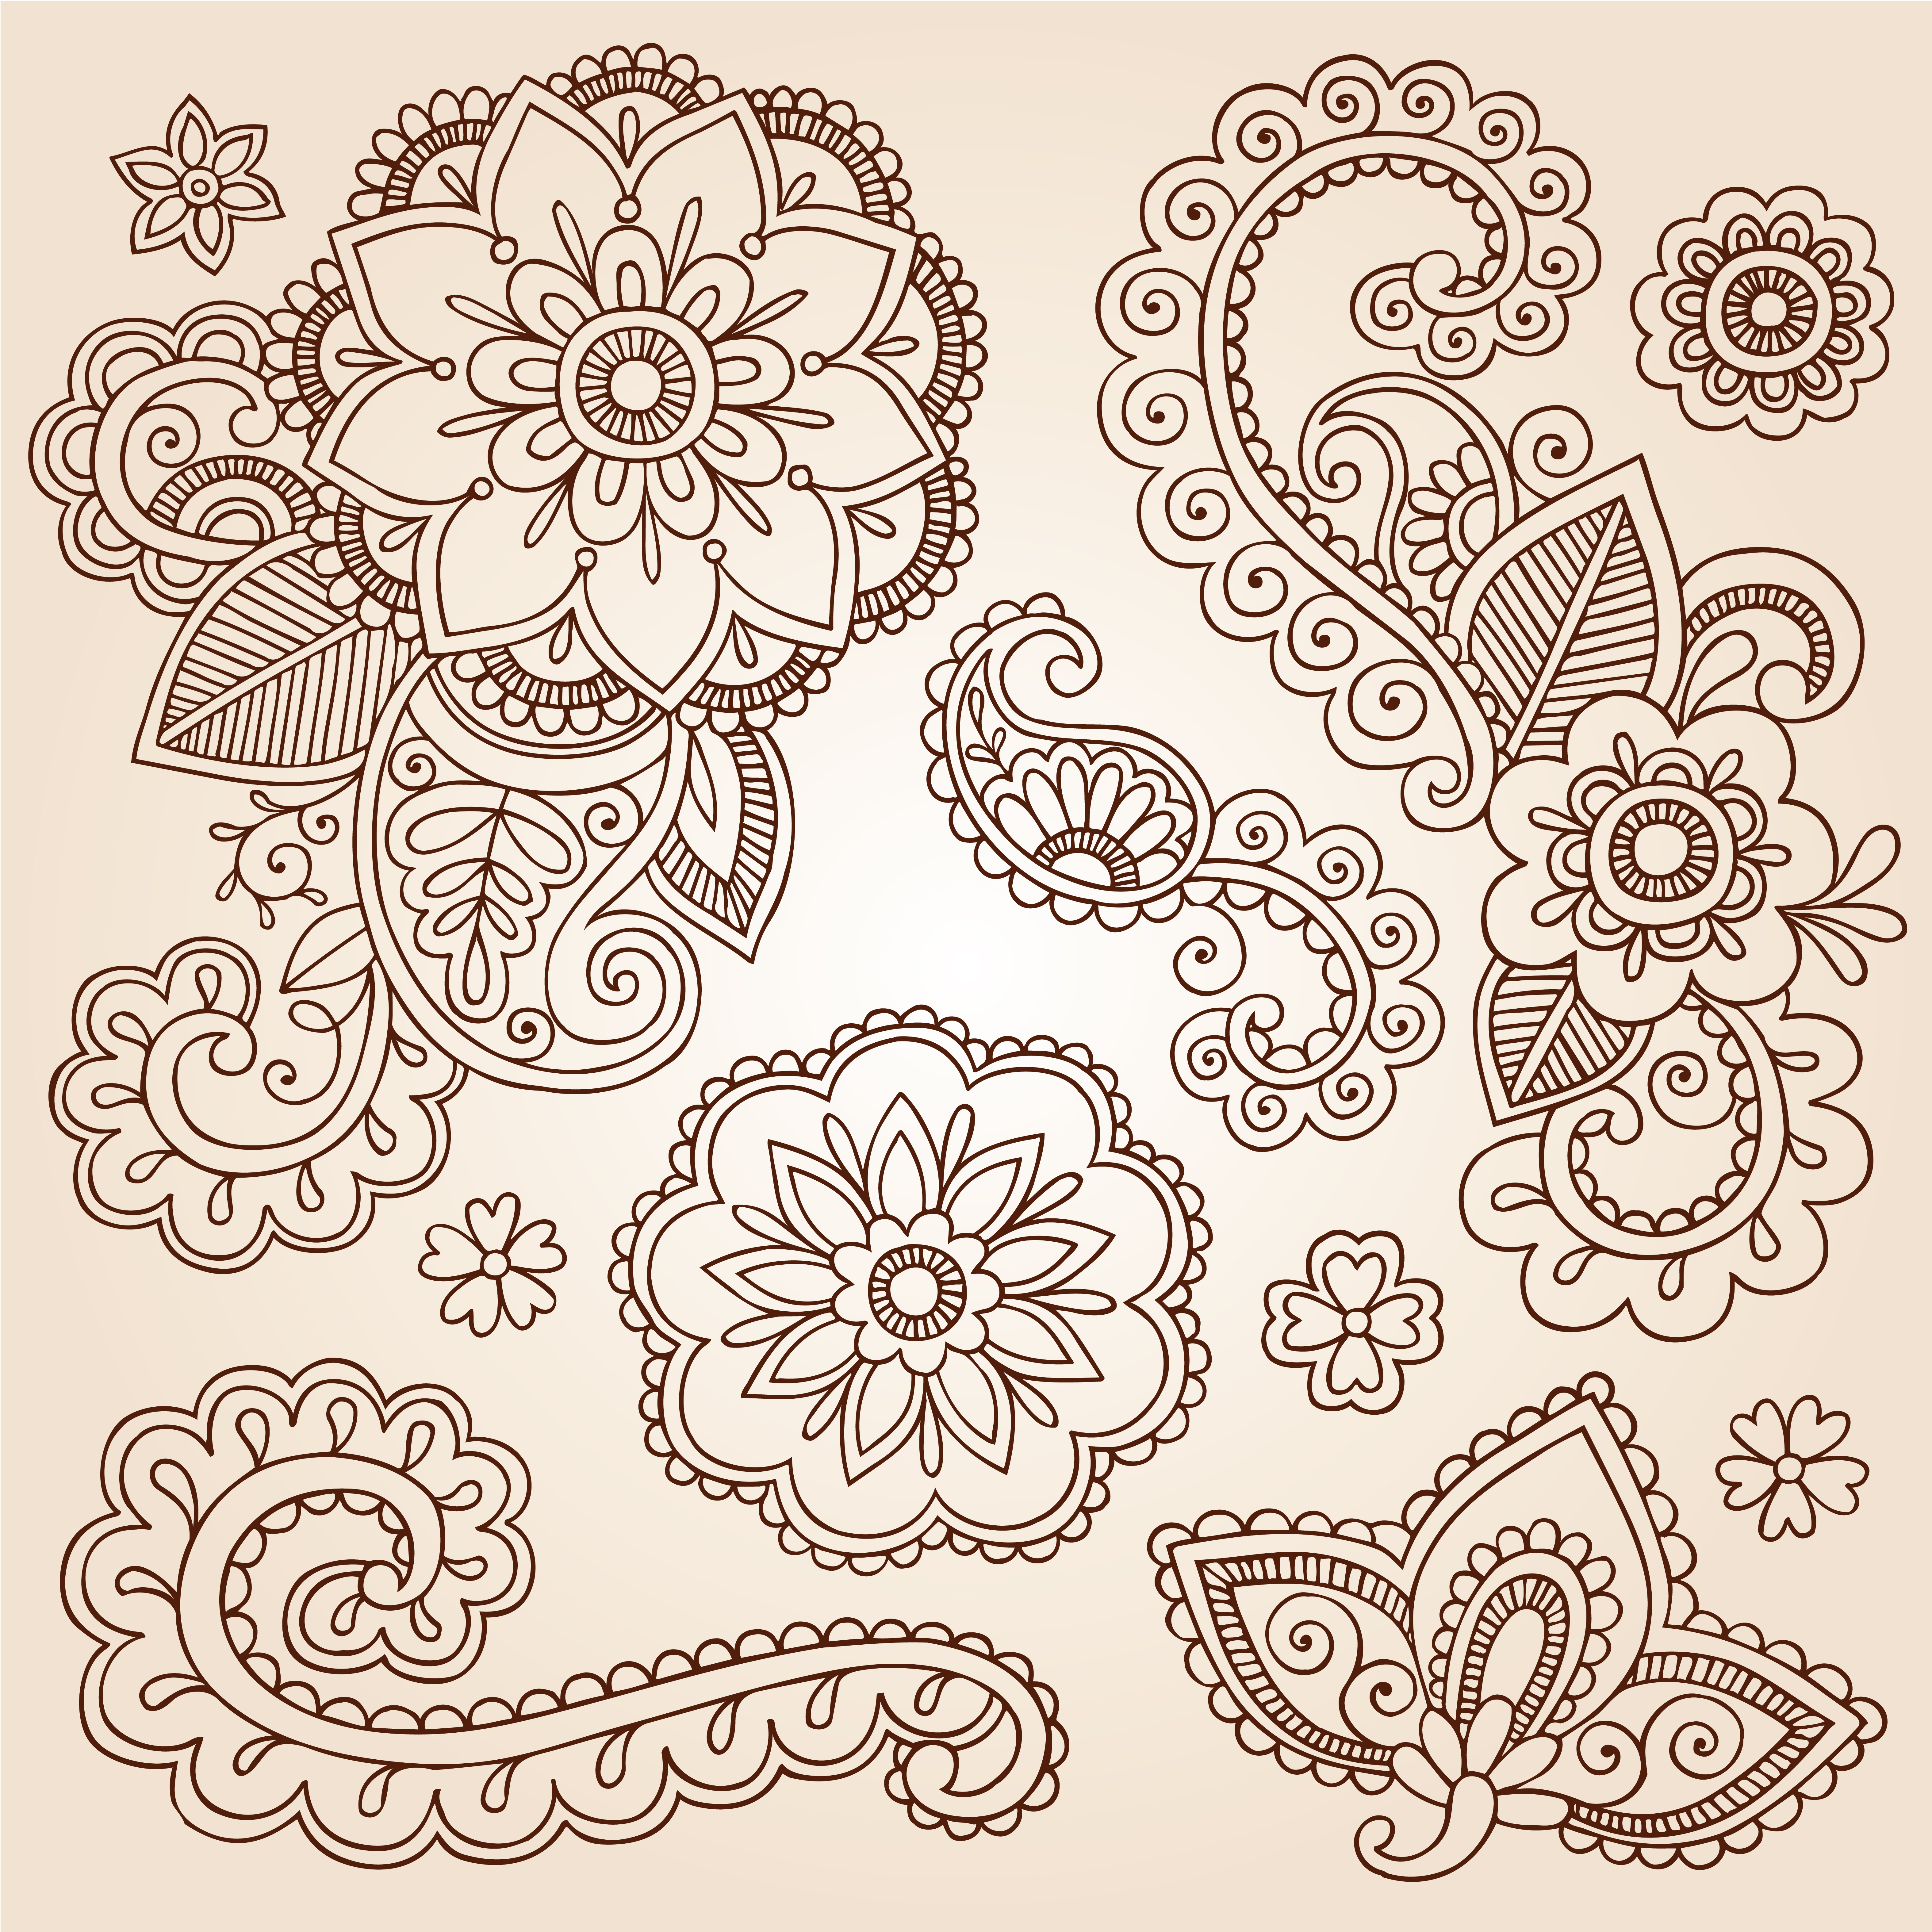 Stock: Ornate Henna Paisley Doodle Vector.